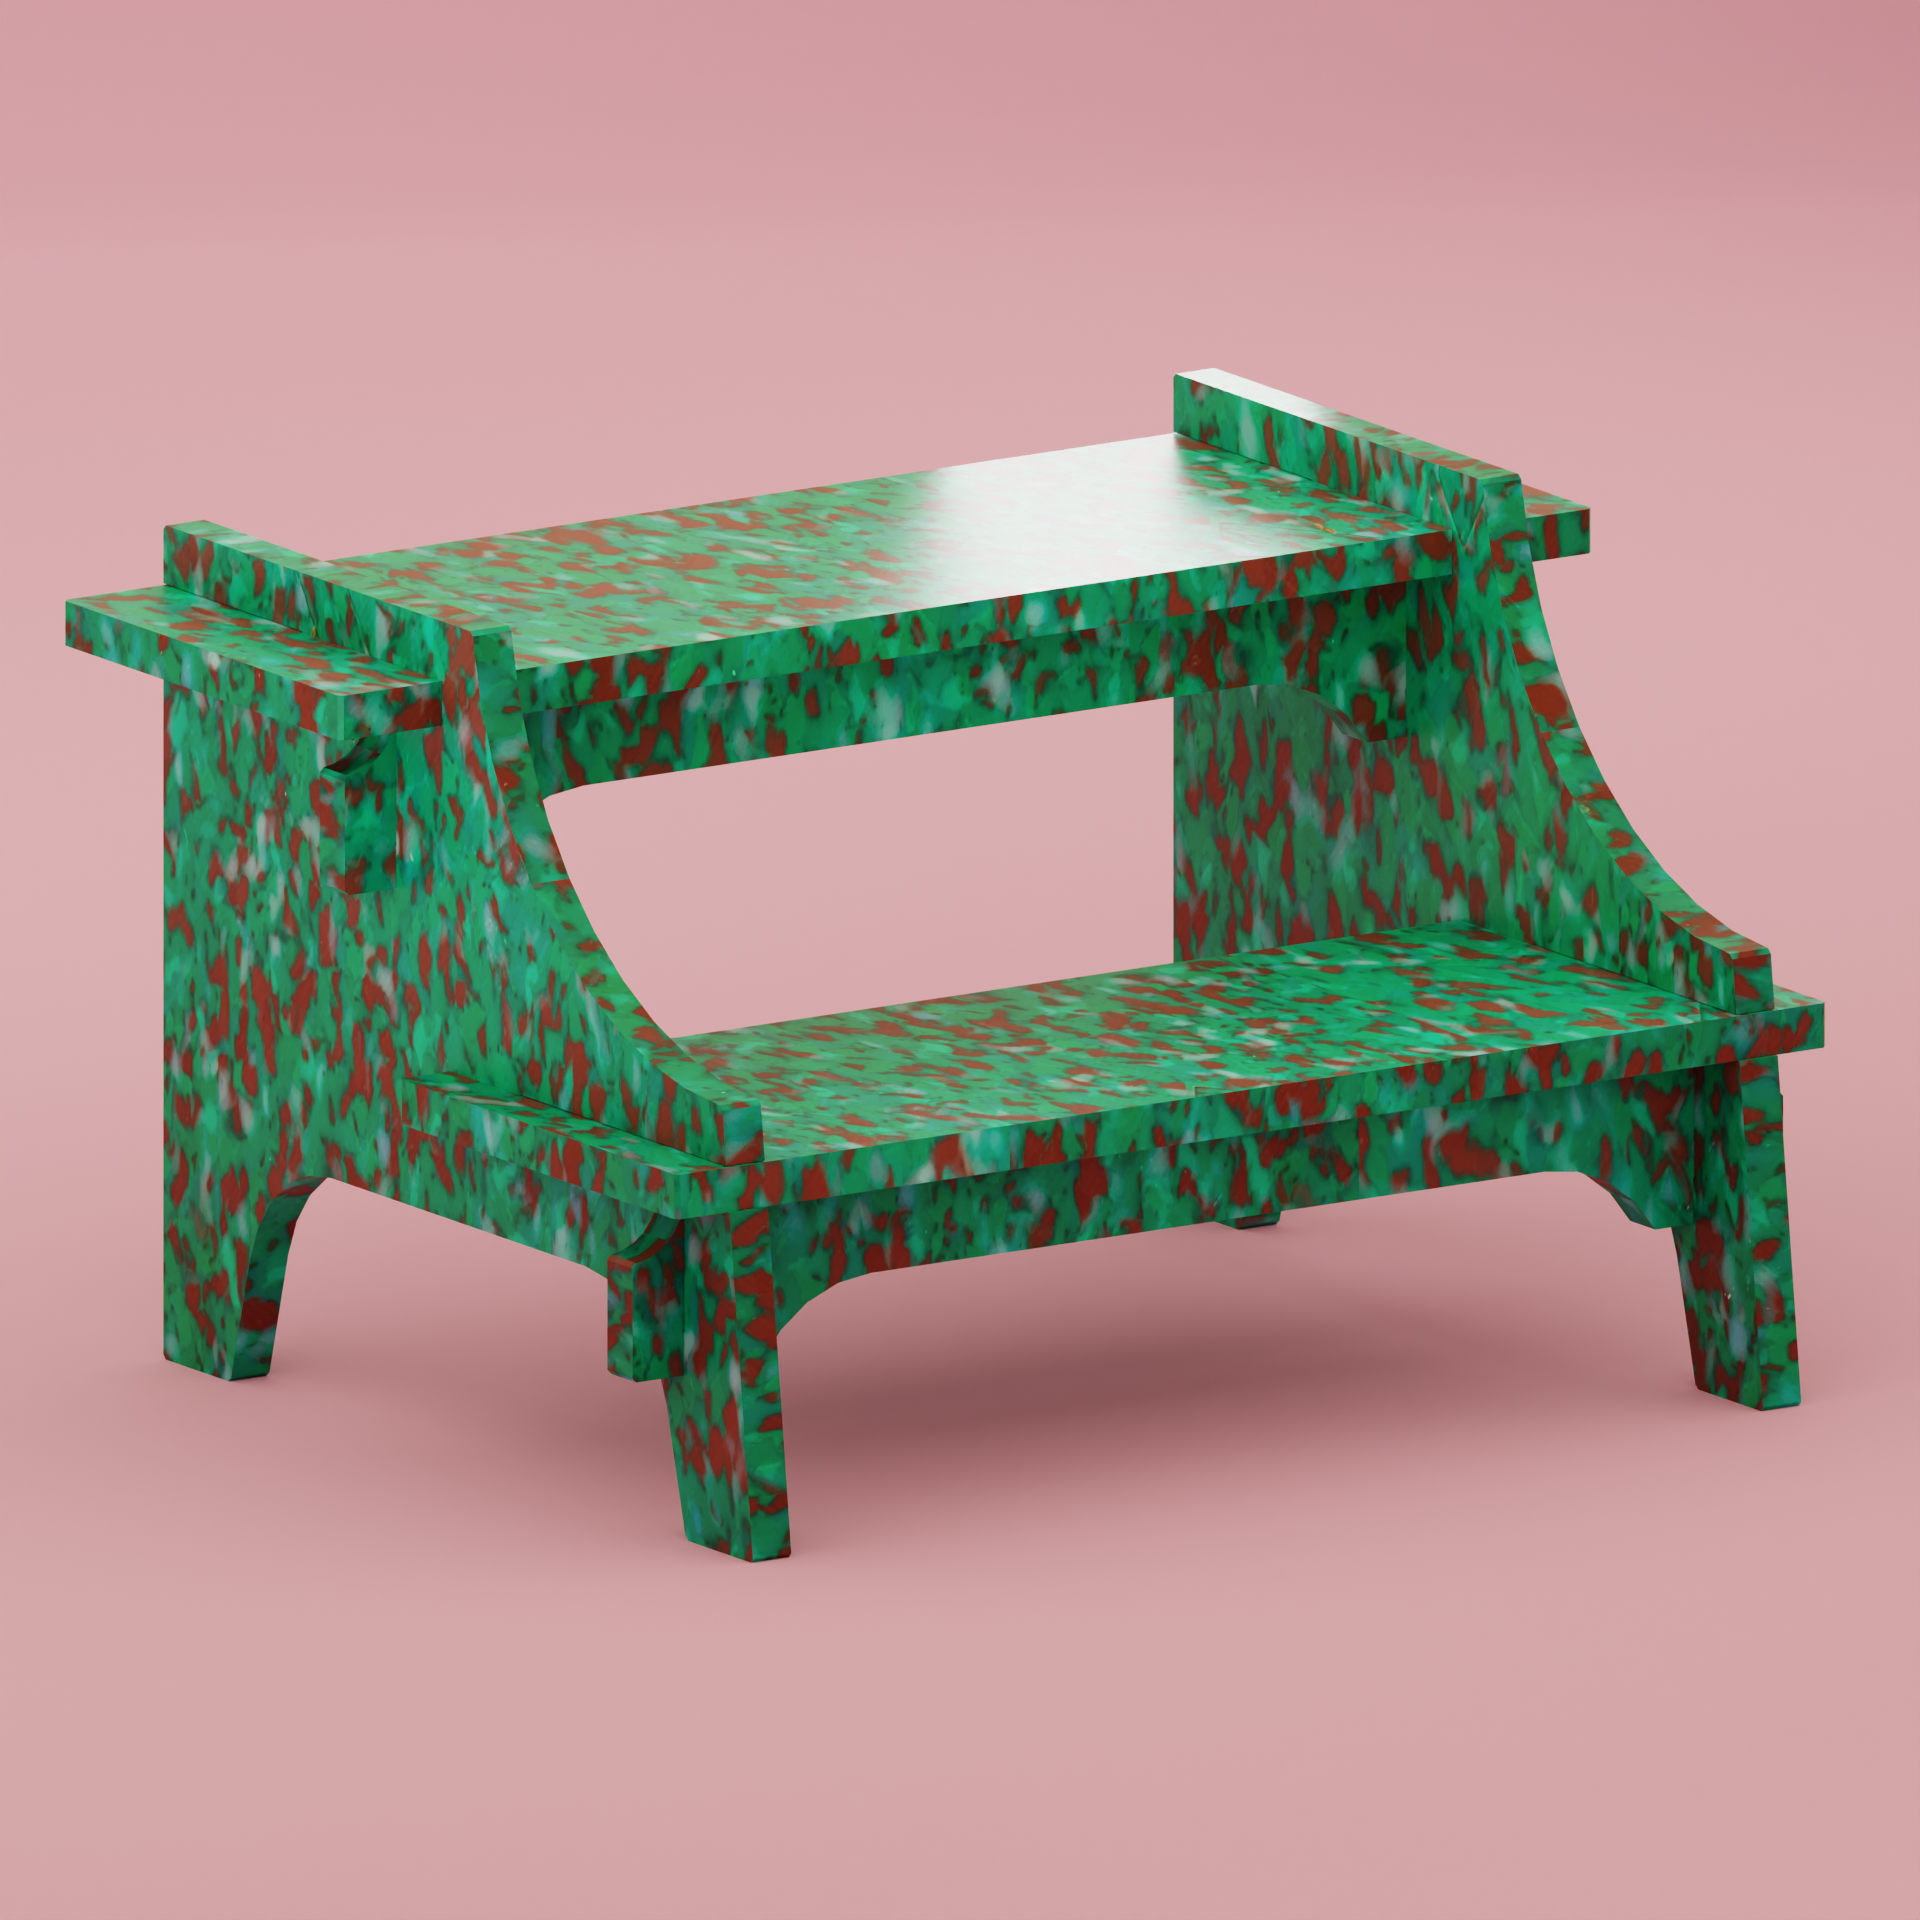 RENDER OF GREEN STEP STOOL BY THE MINIMONO PROJECT - BRAND FOR ECO FRIENDLY - PLAYFUL - MULTI FUNCTIONAL - SUSTAINABLE - HIGH QUALITY - DESIGN FURNITURE FROM RECYCLED PLASTIC FOR BOTH ADULT AND CHILDREN MADE IN BERLIN GERMANY